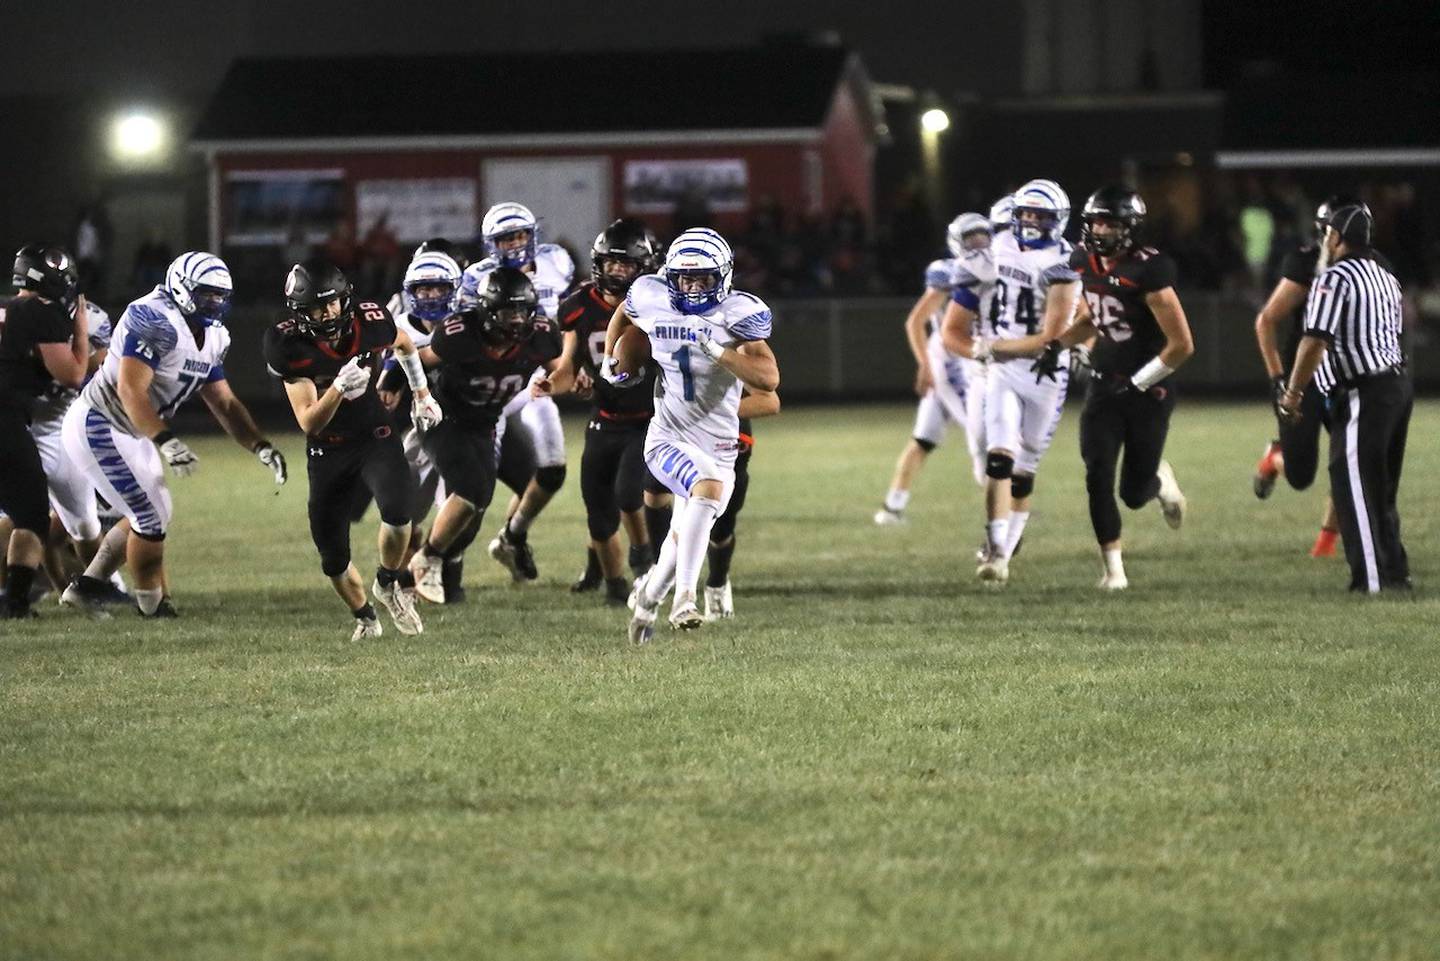 Princeton sophomore back Casey Etheridge breaks loose for a touchdown run at Orion Friday night. He scored five touchdowns in the Tigers' 42-0 win.